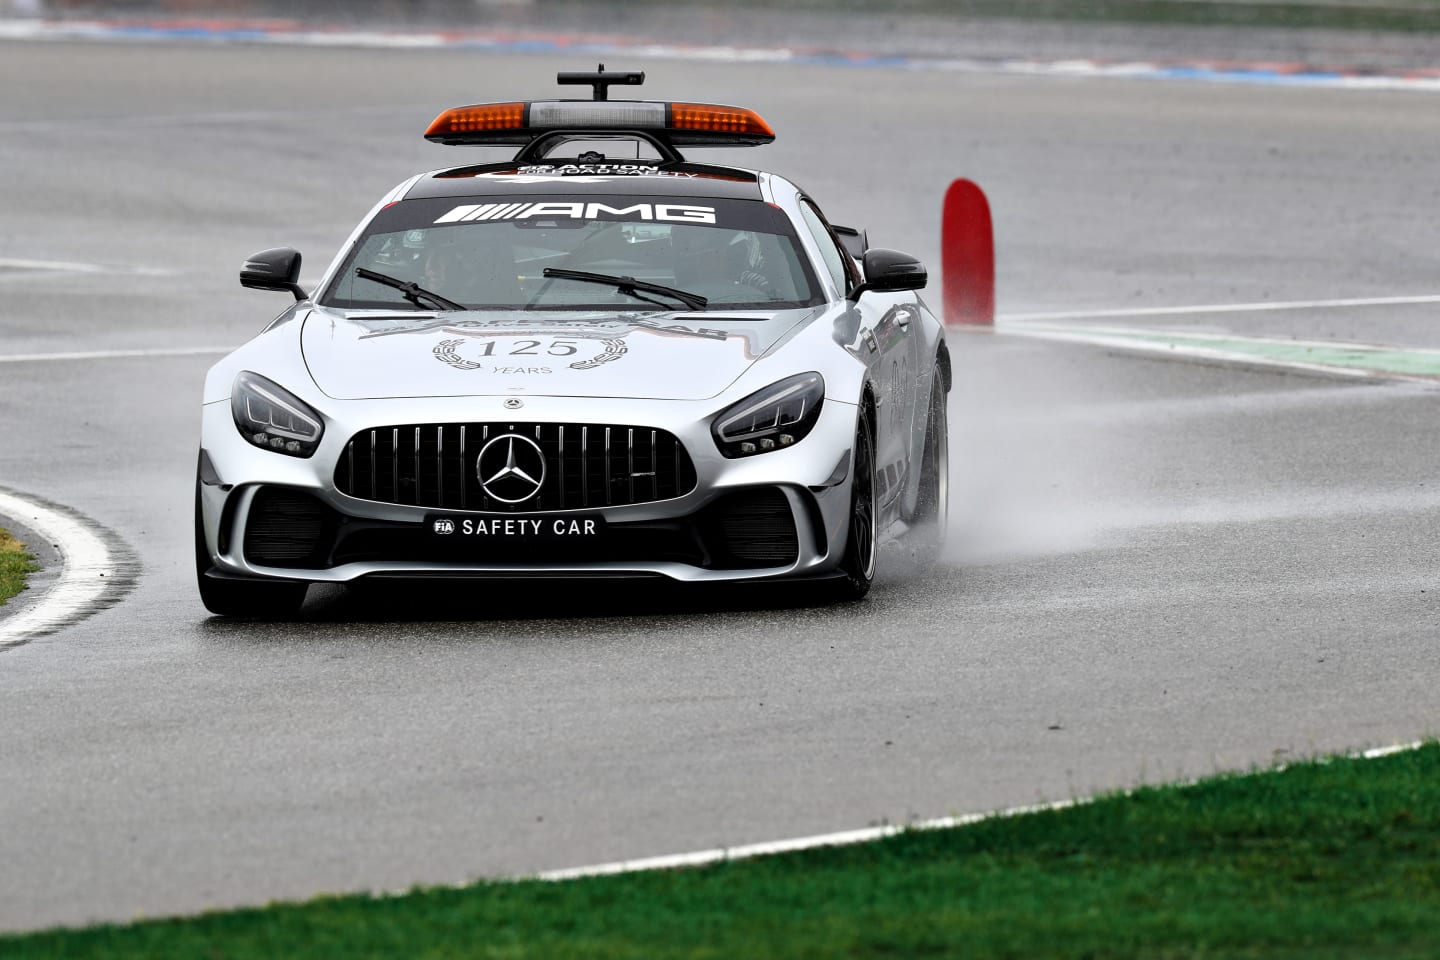 HOCKENHEIM, GERMANY - JULY 28: The safety car pulls into the pit lane during the F1 Grand Prix of